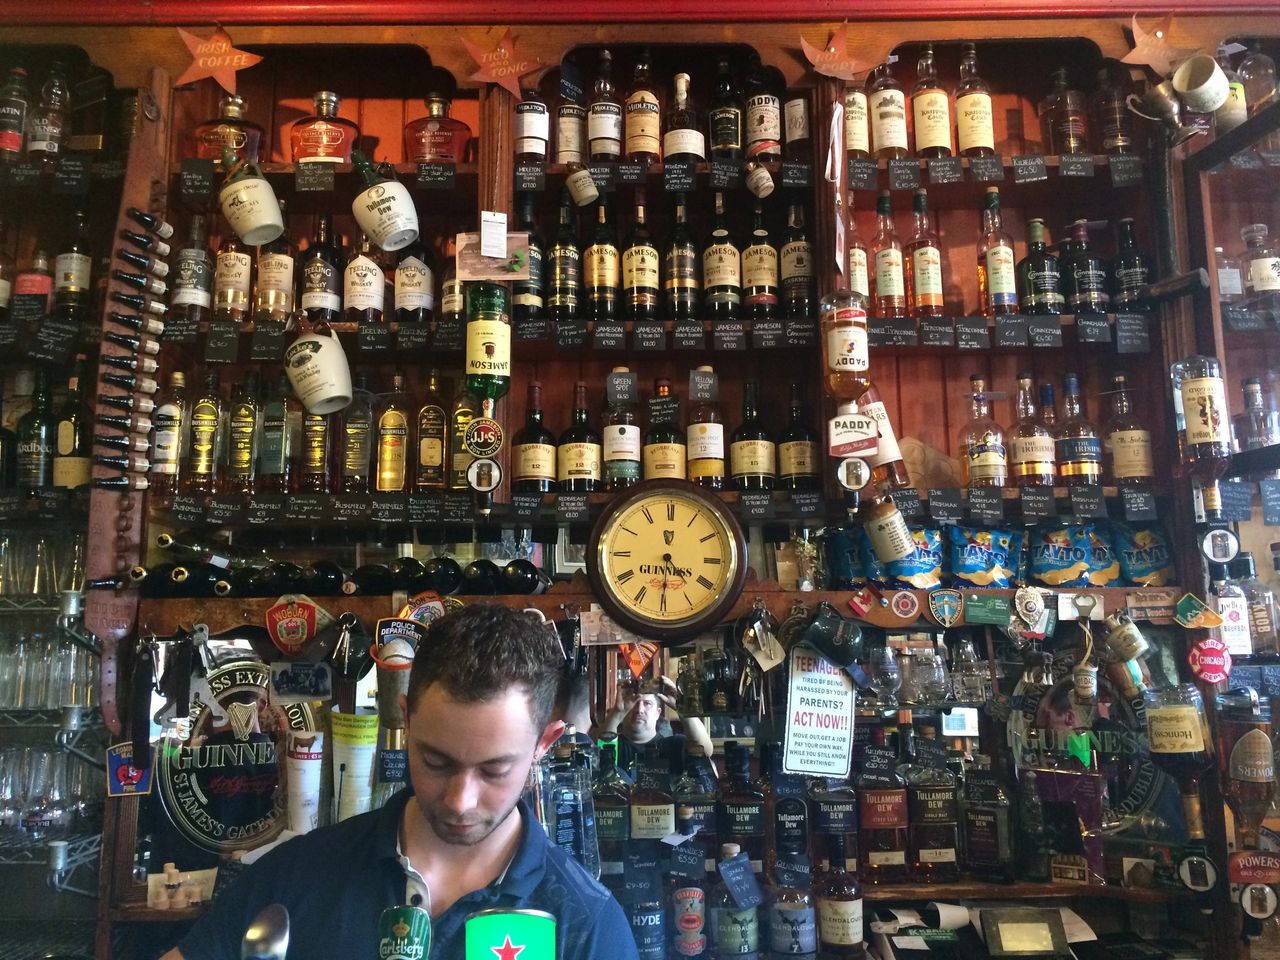 Dick Mack's pub in Ireland offers great whiskey